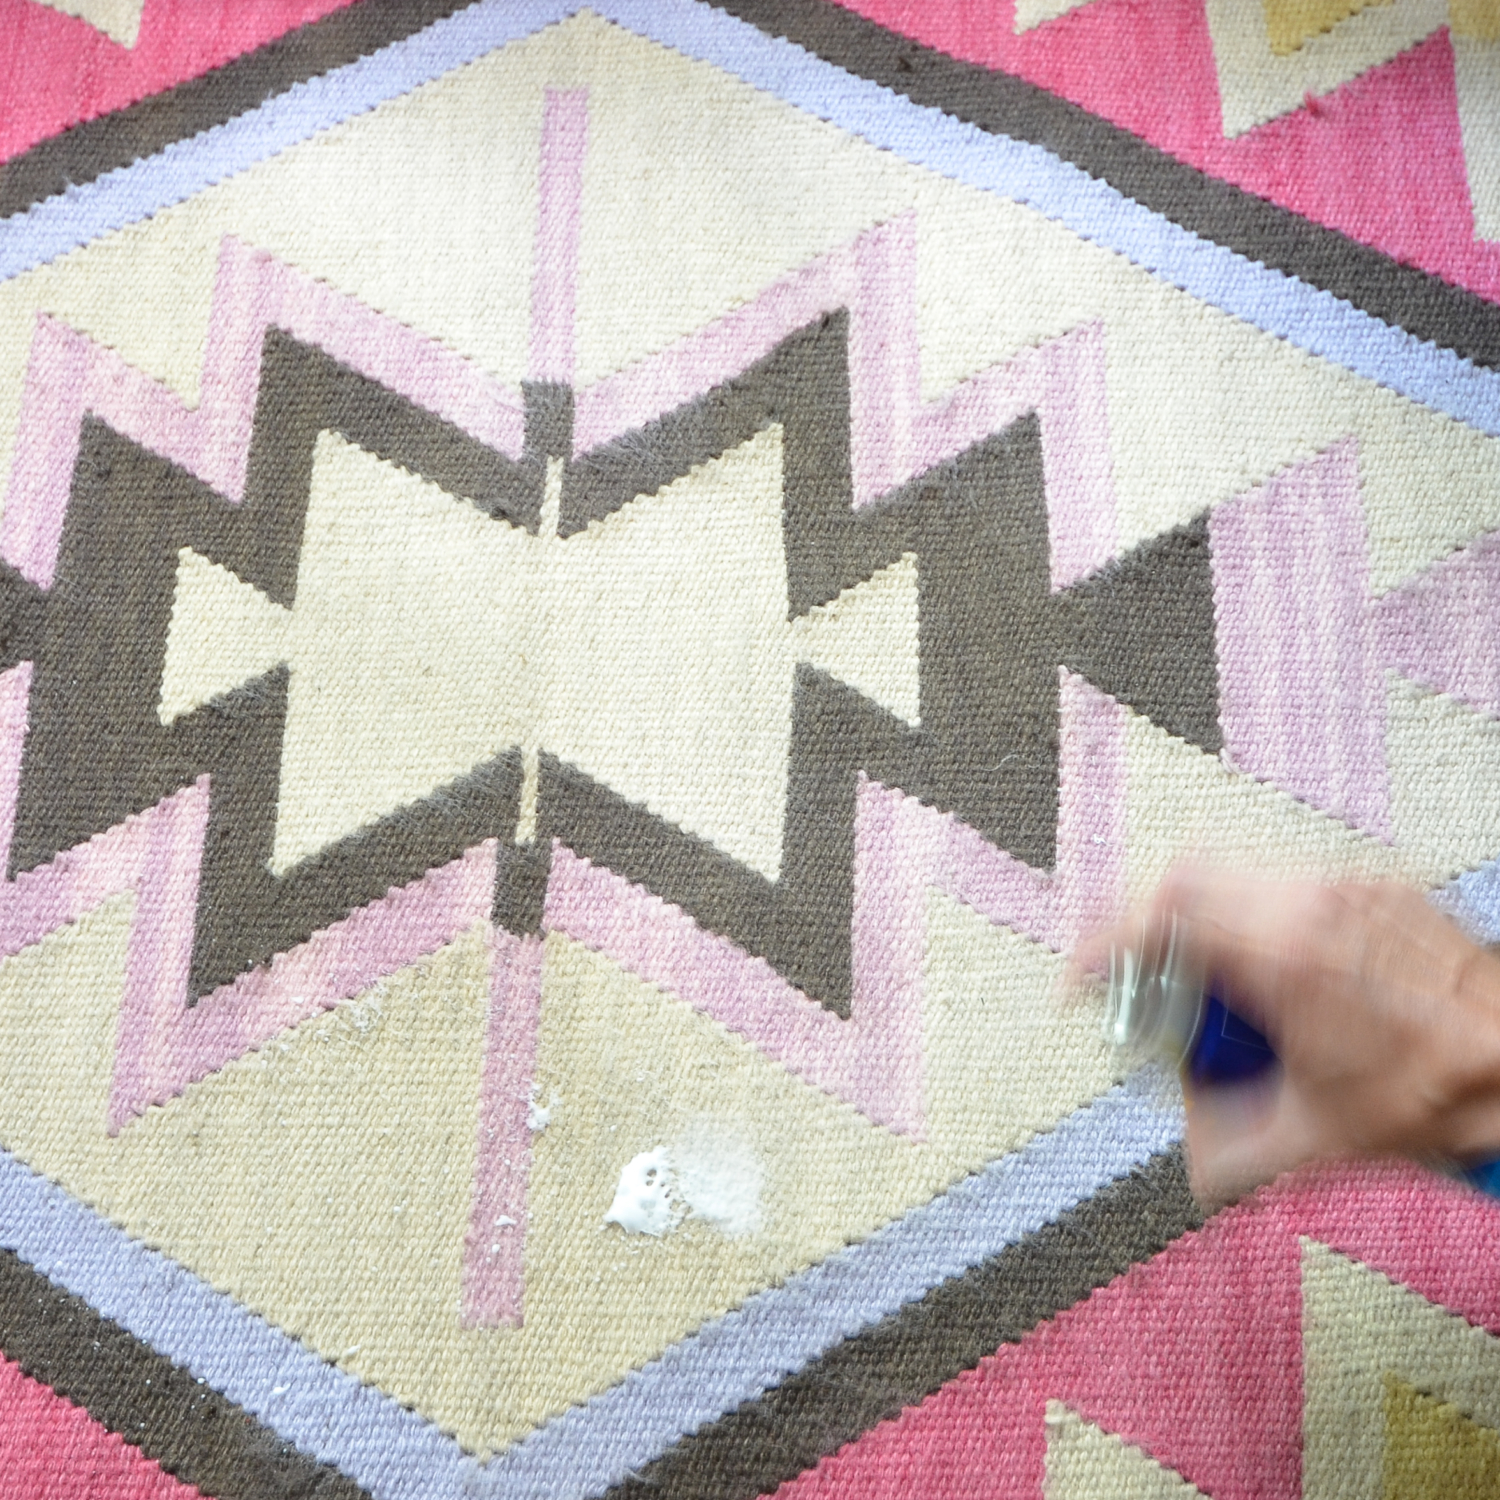 Easy tips for how to keep entry rugs clean!